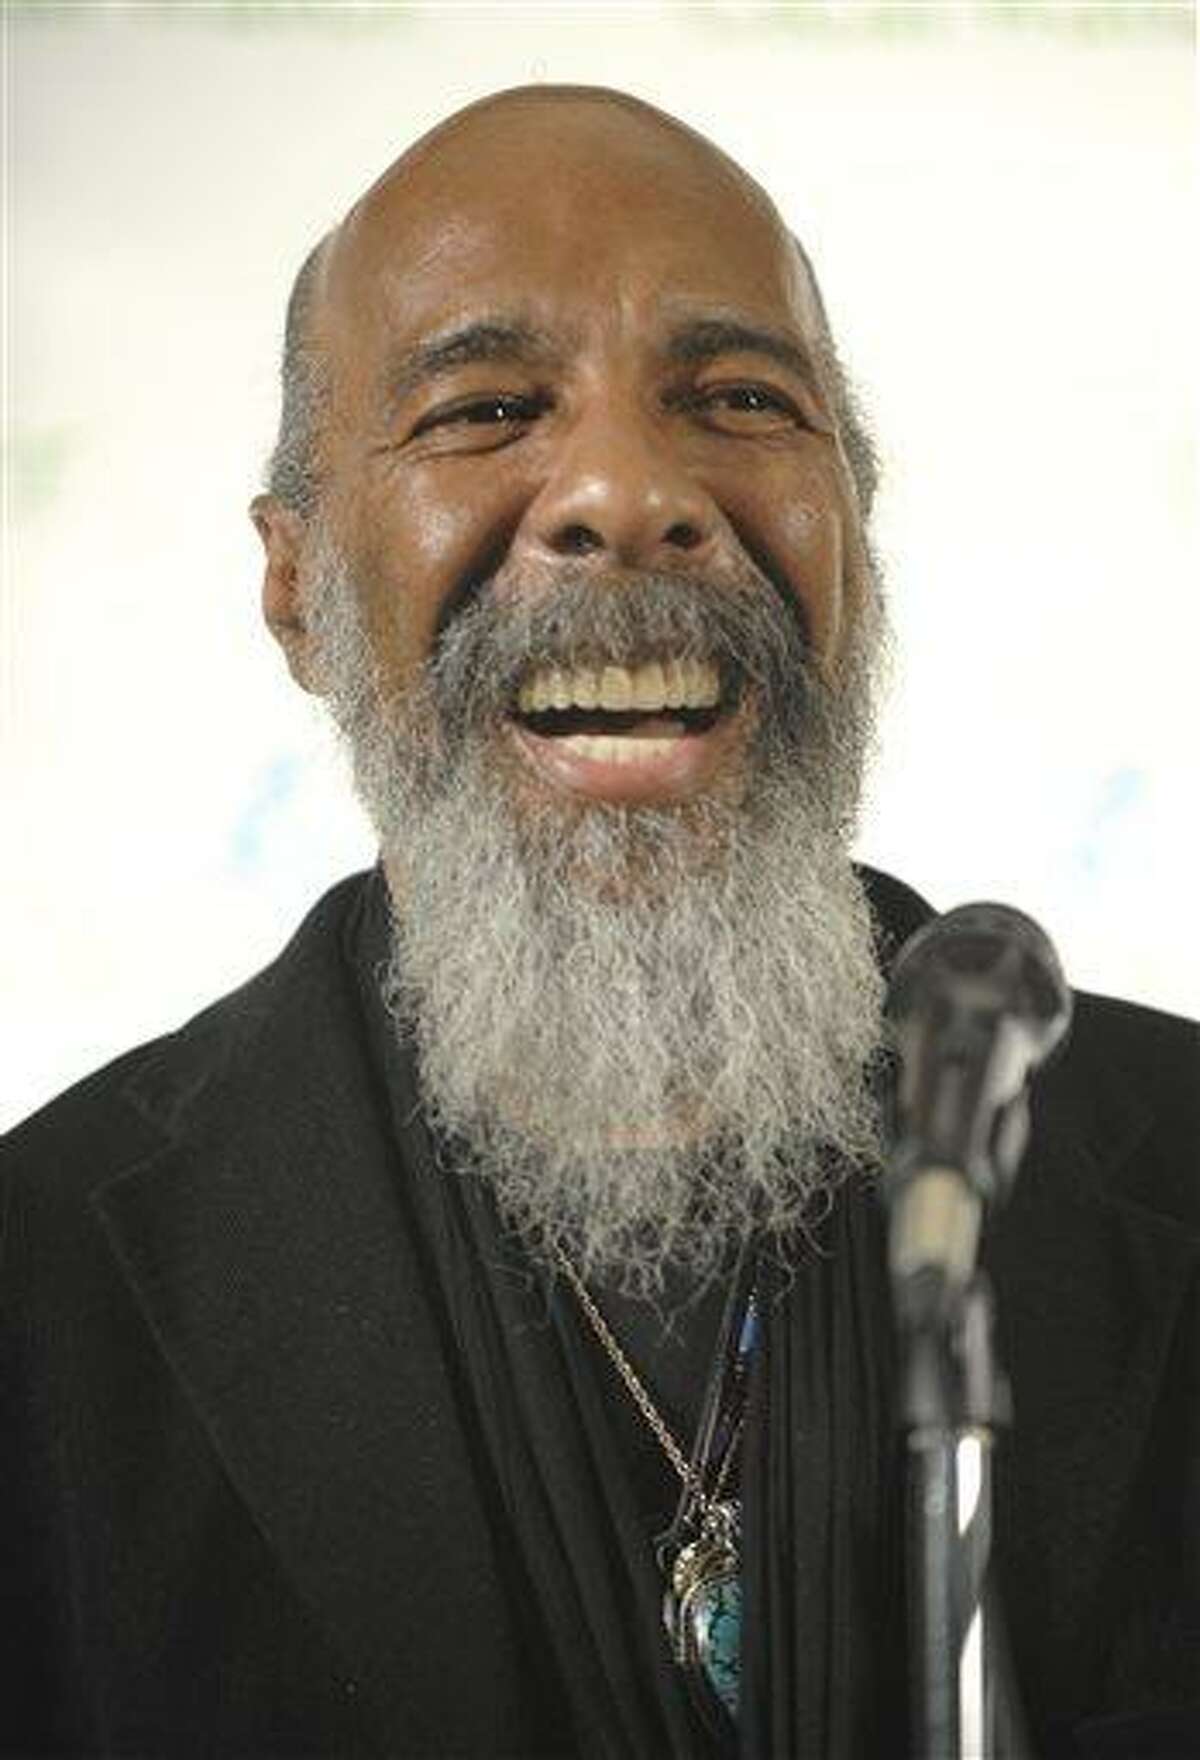 FILE - In this May 3, 2009 file photo, singer Richie Havens makes an appearance in the press room at the Clearwater Concert celebrating Pete Seeger's 90th birthday at Madison Square Garden, in New York. Havens, who sang and strummed for a sea of people at Woodstock, has died at 72. His family says in a statement that Havens died Monday, April 22, 2013, of a heart attack. (AP Photo/Peter Kramer, File)